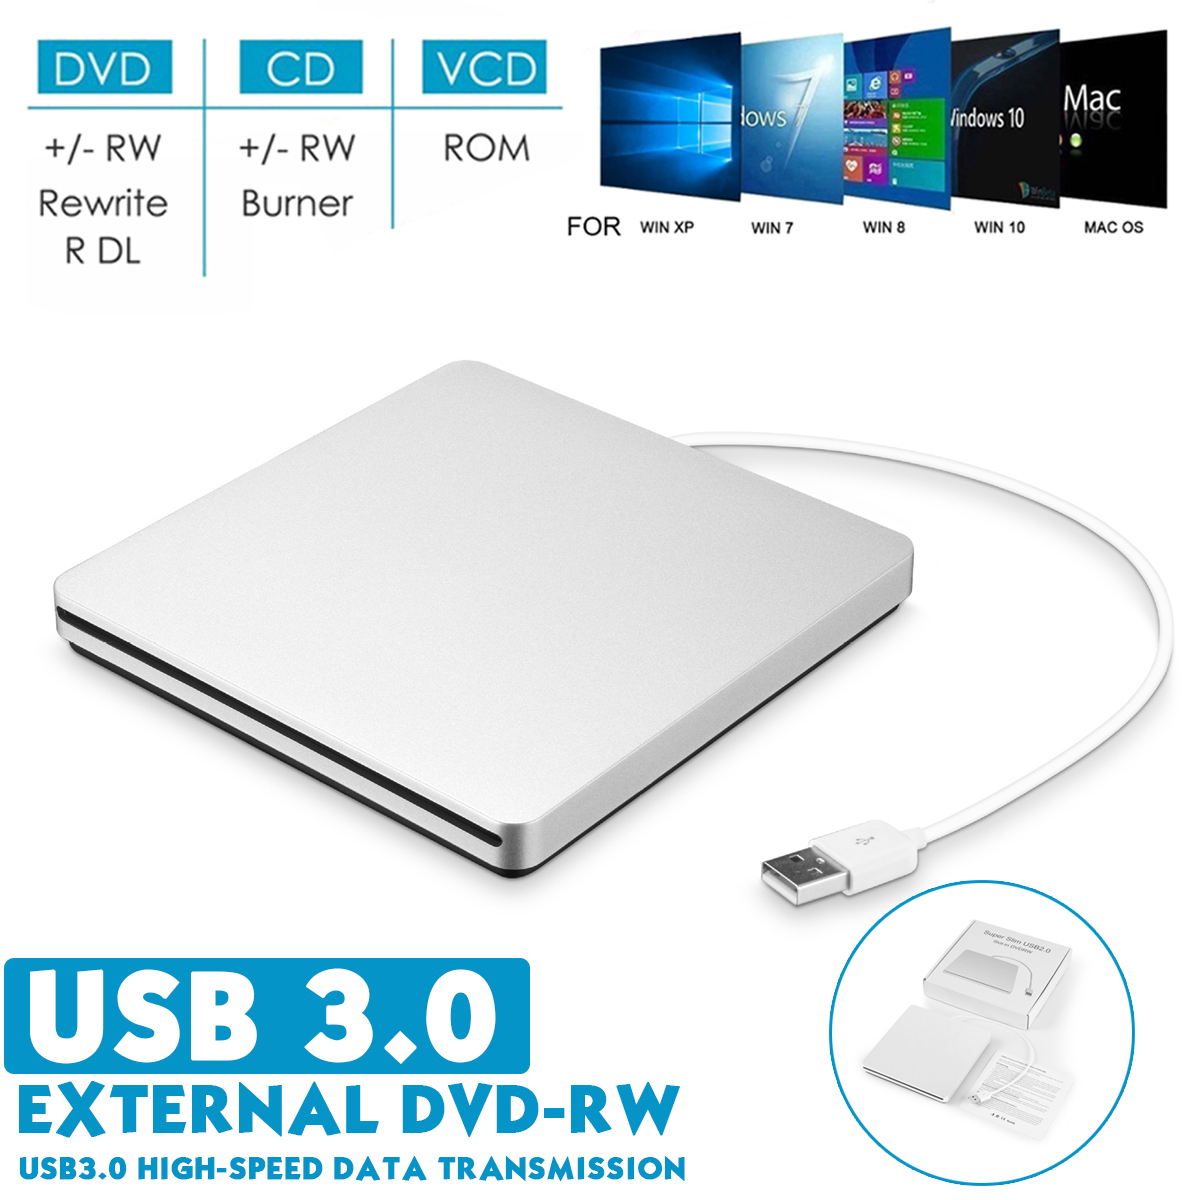 Portable-USB-30-Silver-External-DVD-RW-Max24X-High-speed-Data-Transmission-for-Win-XP-Win-7-Win-8-Wi-1701692-1